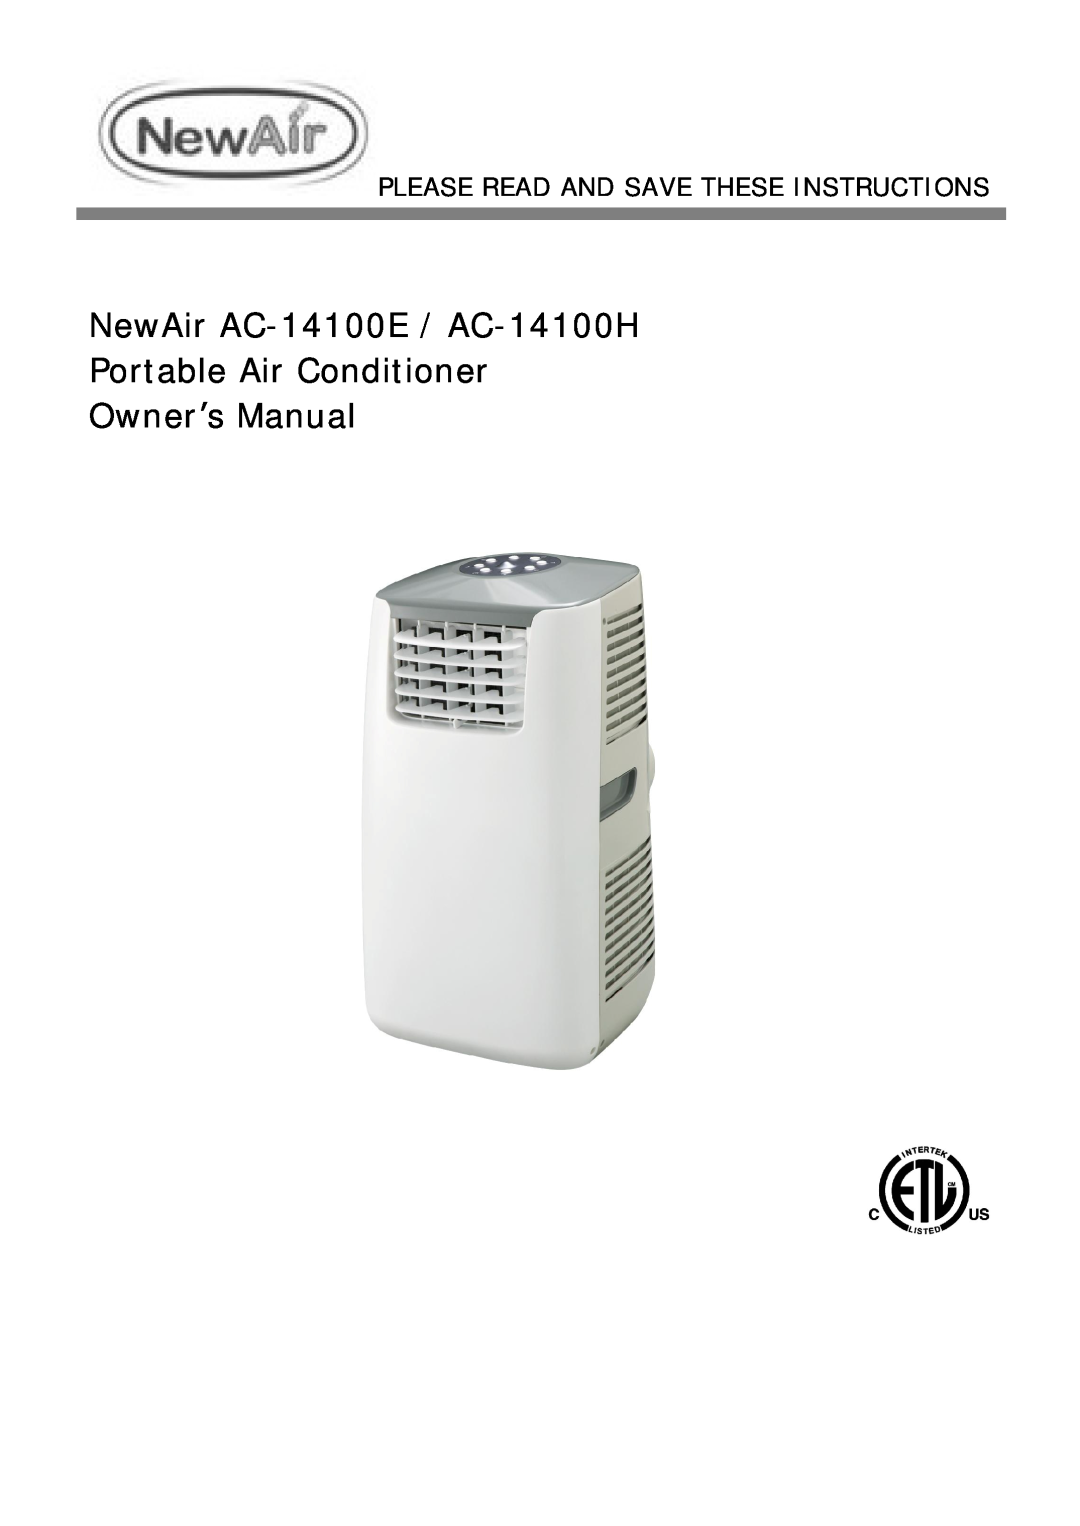 NewAir owner manual NewAir AC-14100E / AC-14100H, Please Read And Save These Instructions 